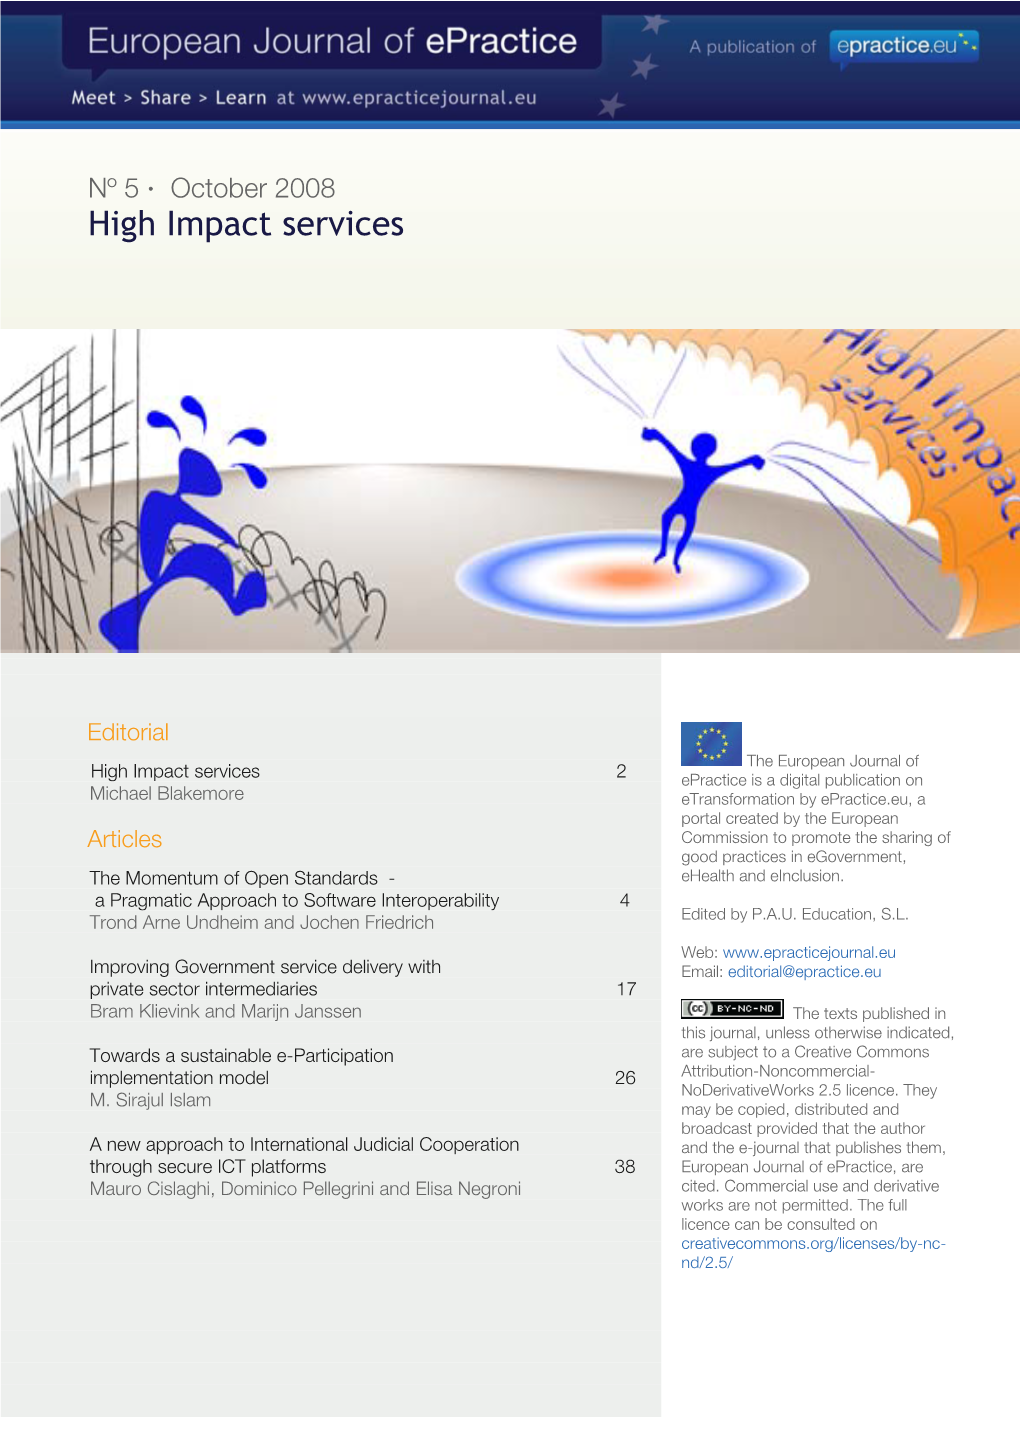 High Impact Services